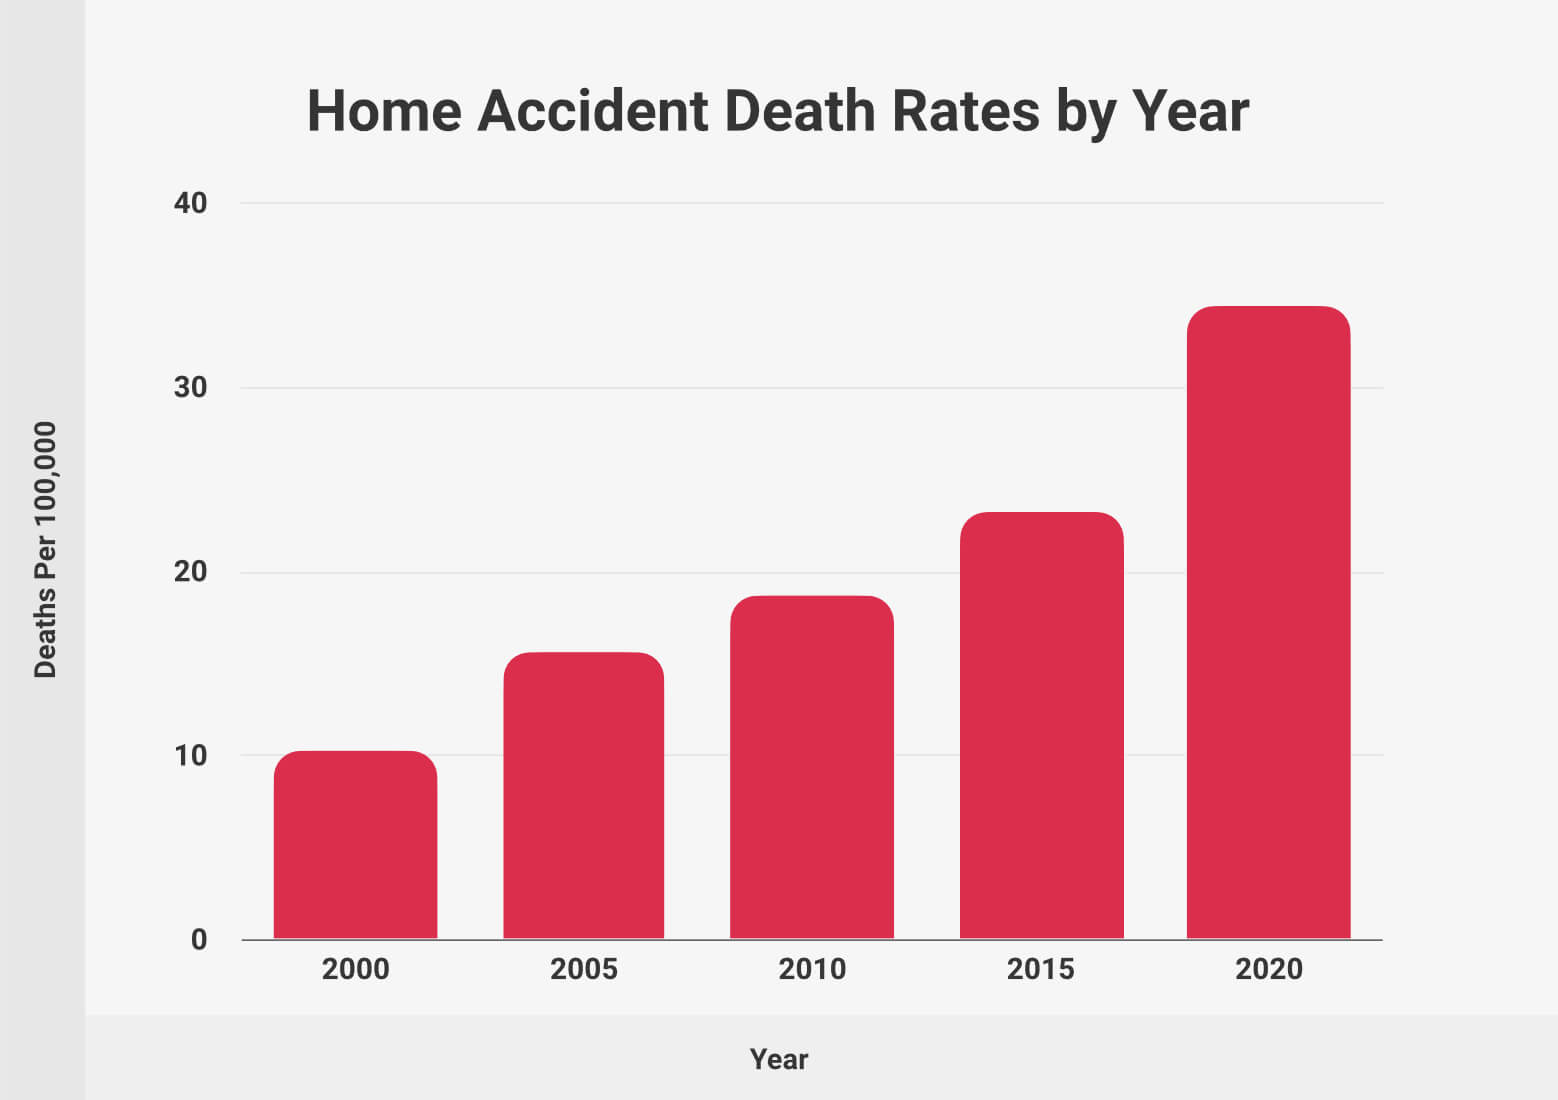 Home Accident Death Rates